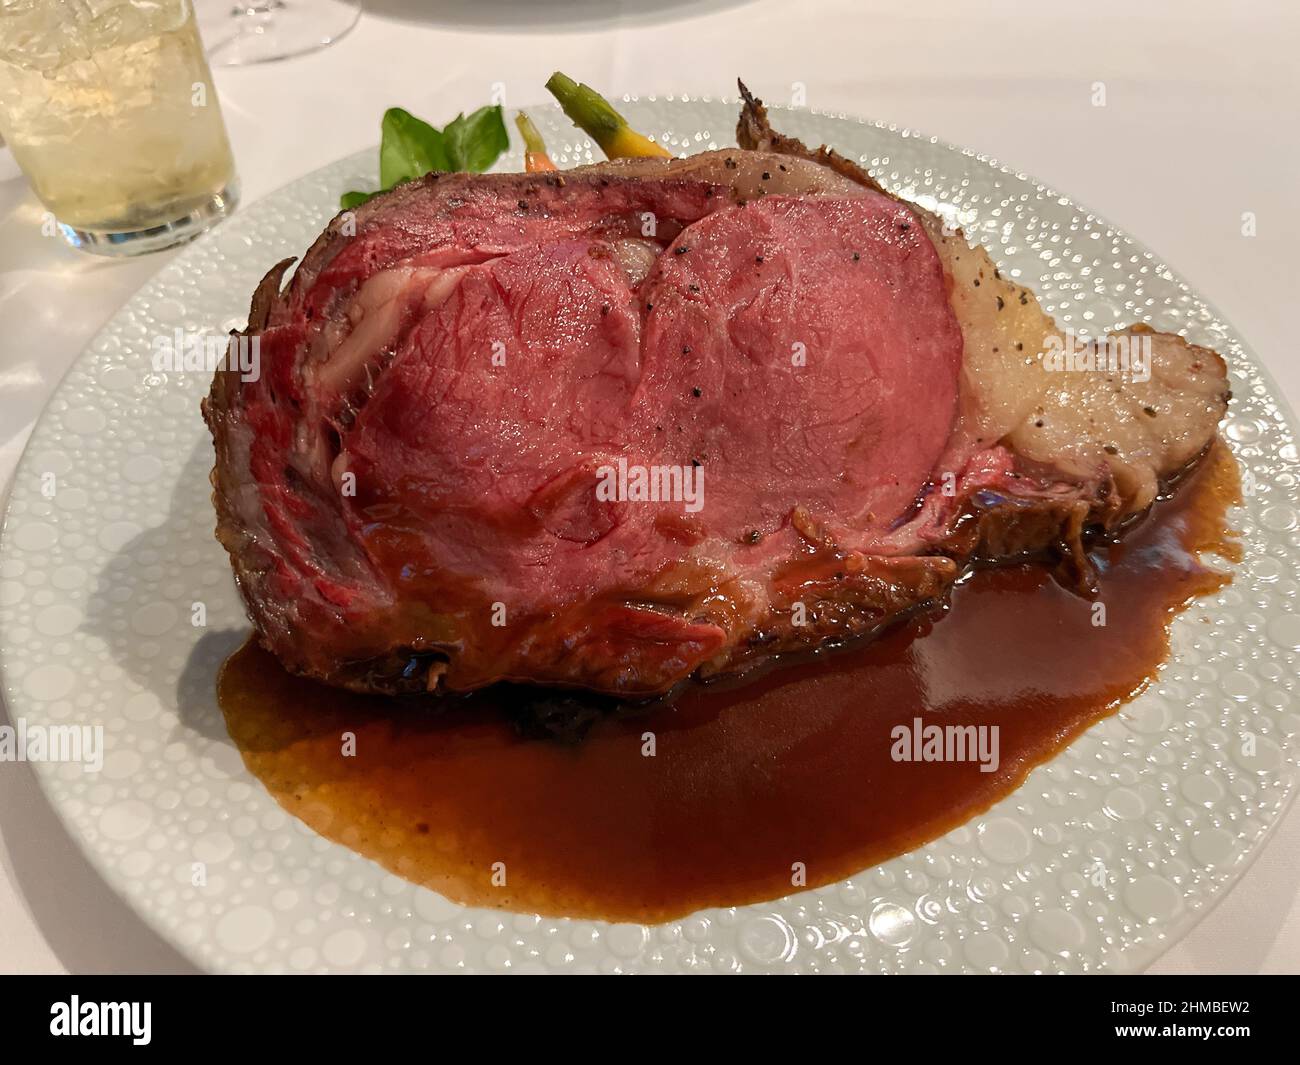 Lawrys seasoning hi-res stock photography and images - Alamy